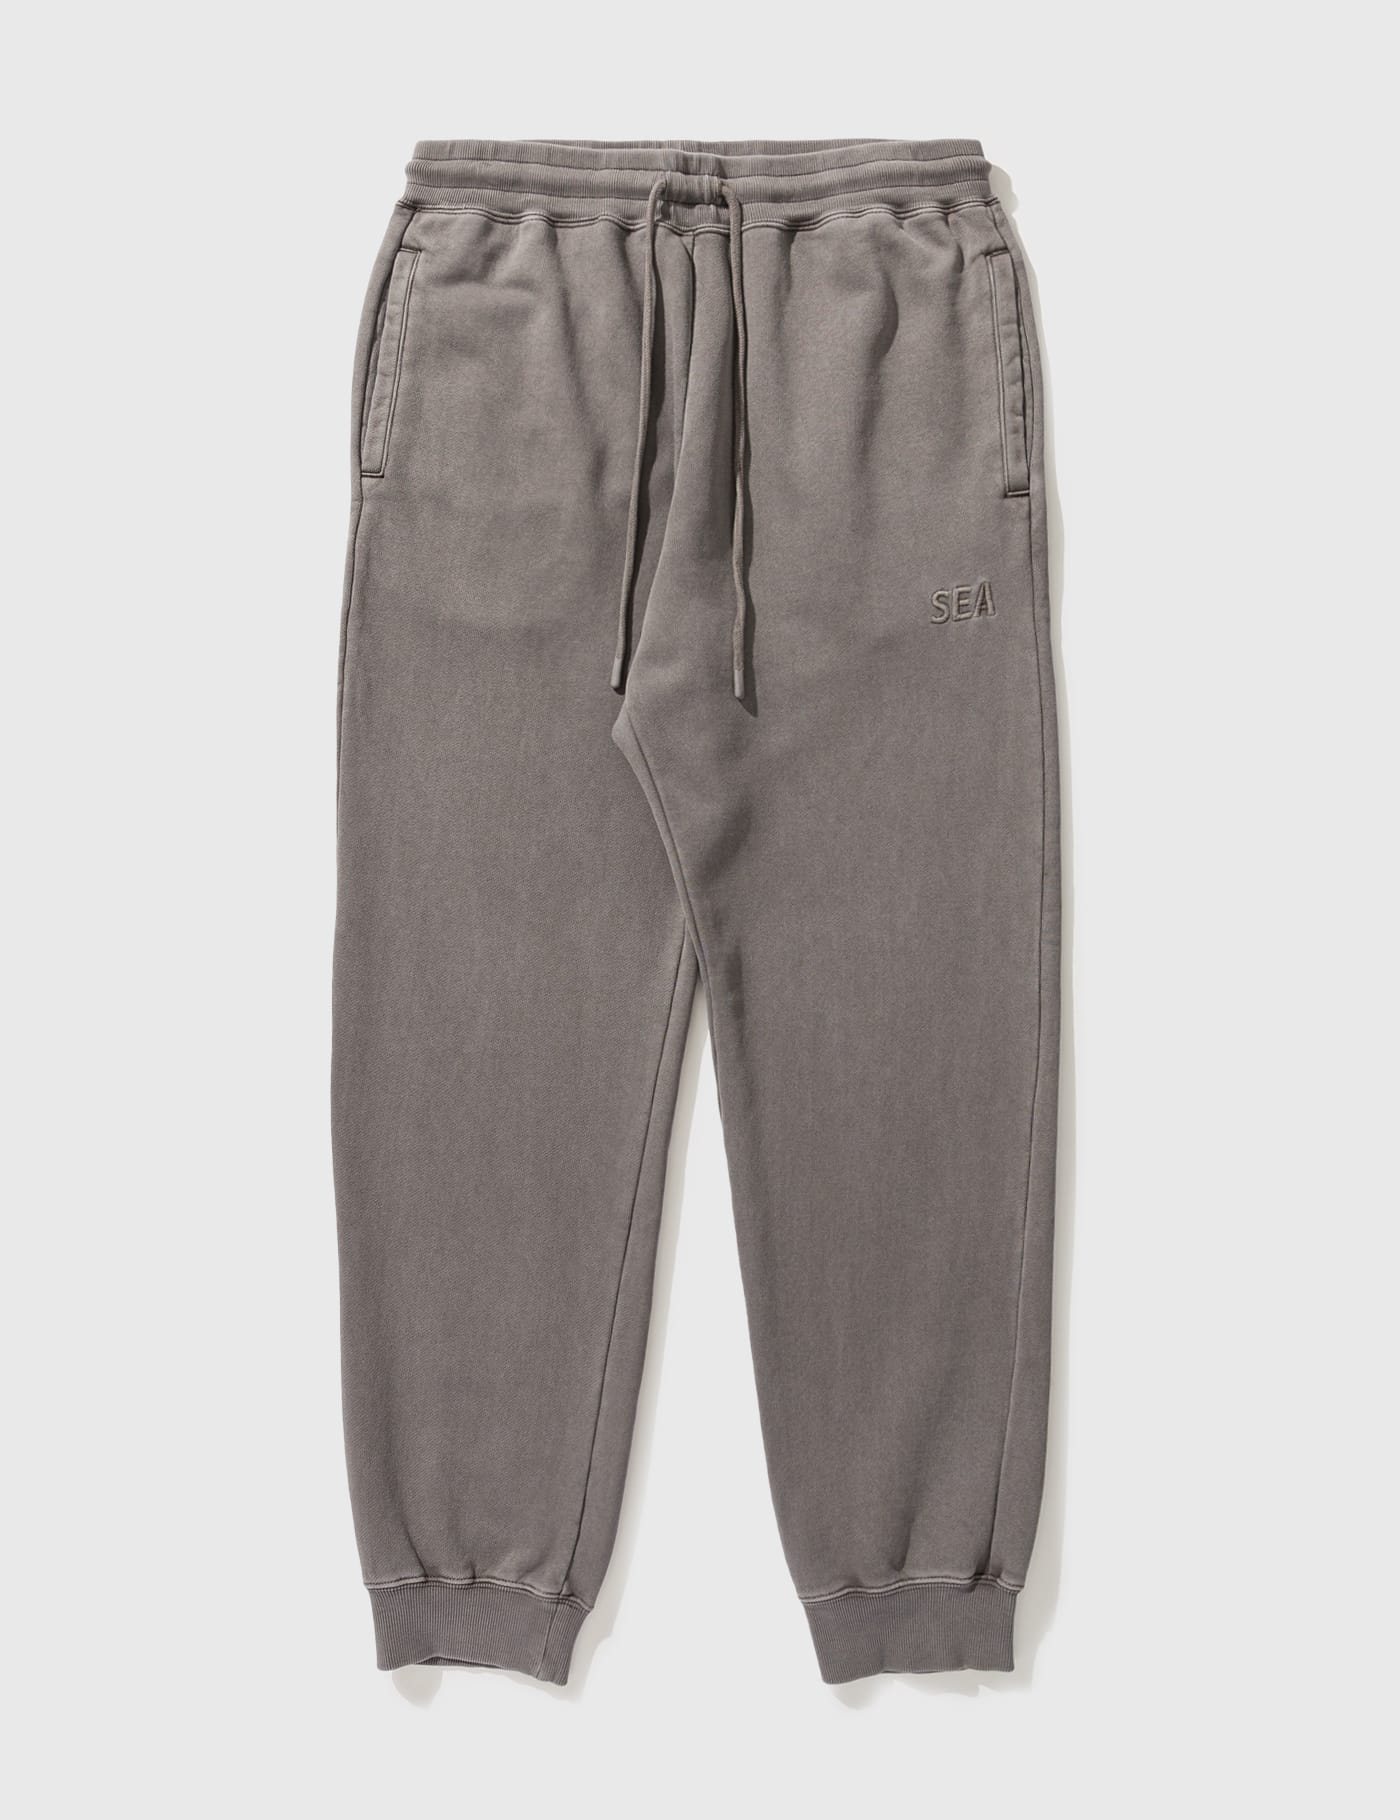 Wind And Sea Pigment Dye Sweatpants In Grey | ModeSens